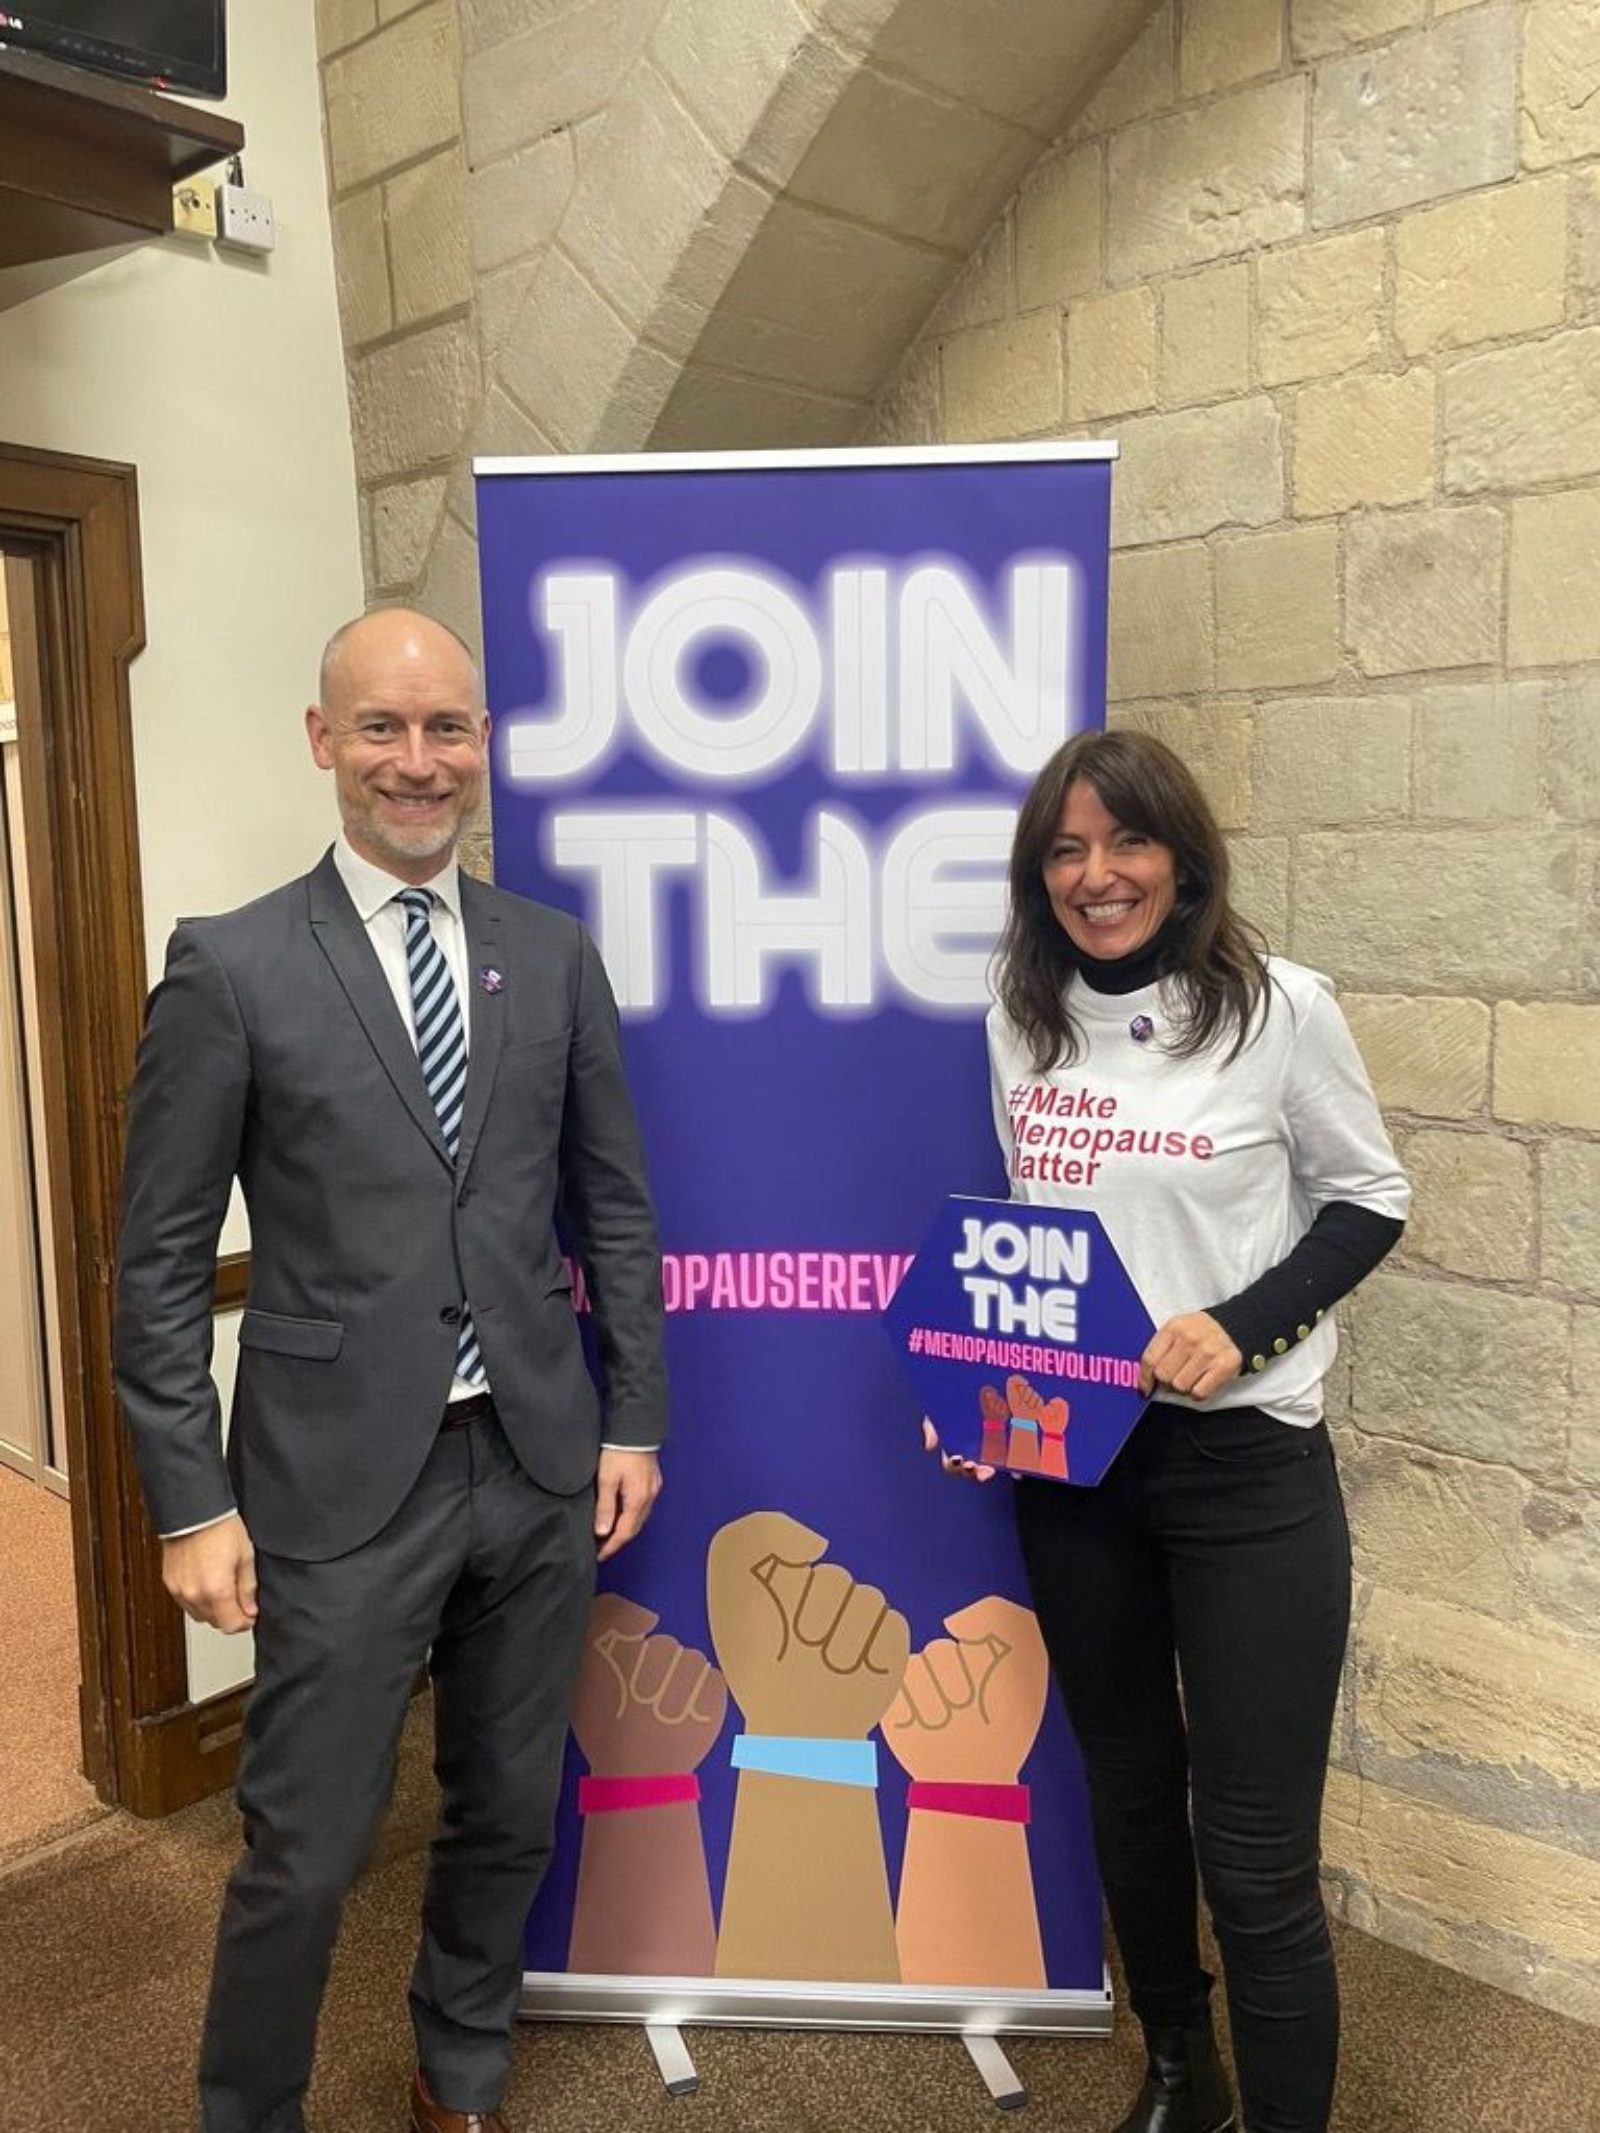 Campaigning with Davina McCall in support of The Menopause Bill 